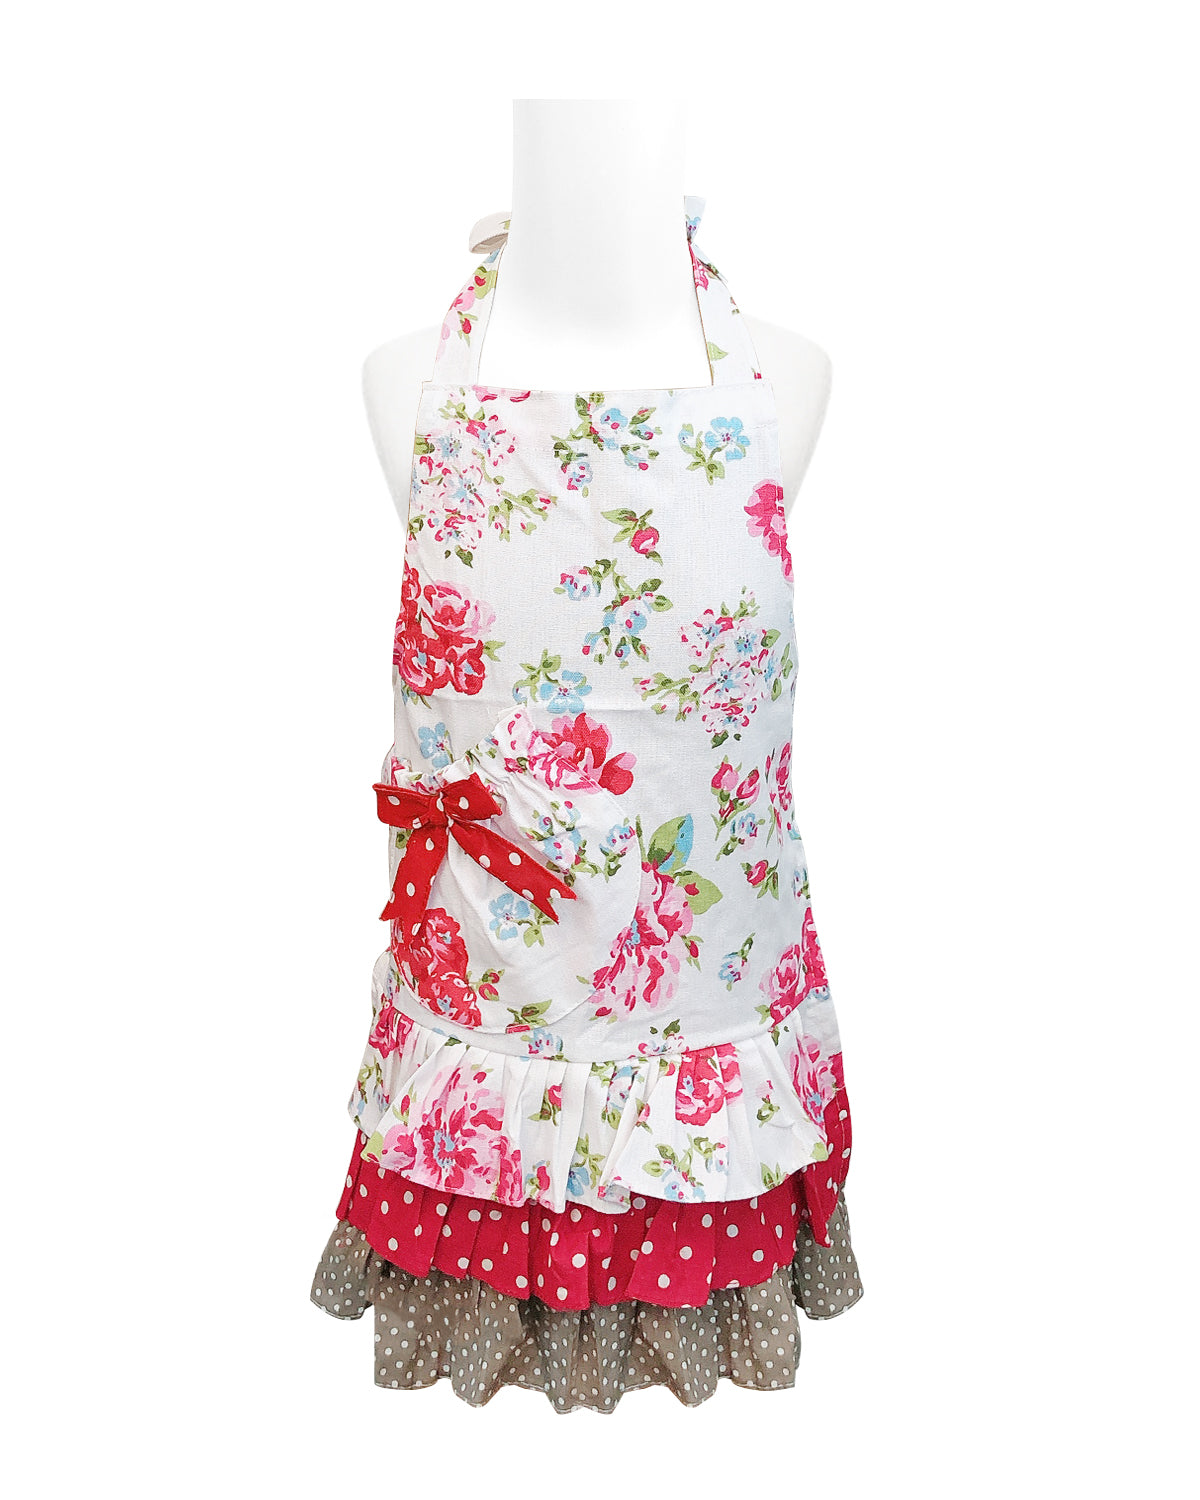 Wrapables Mother and Daughter Ruffles and Roses Apron for Baking, Cooking & Crafts